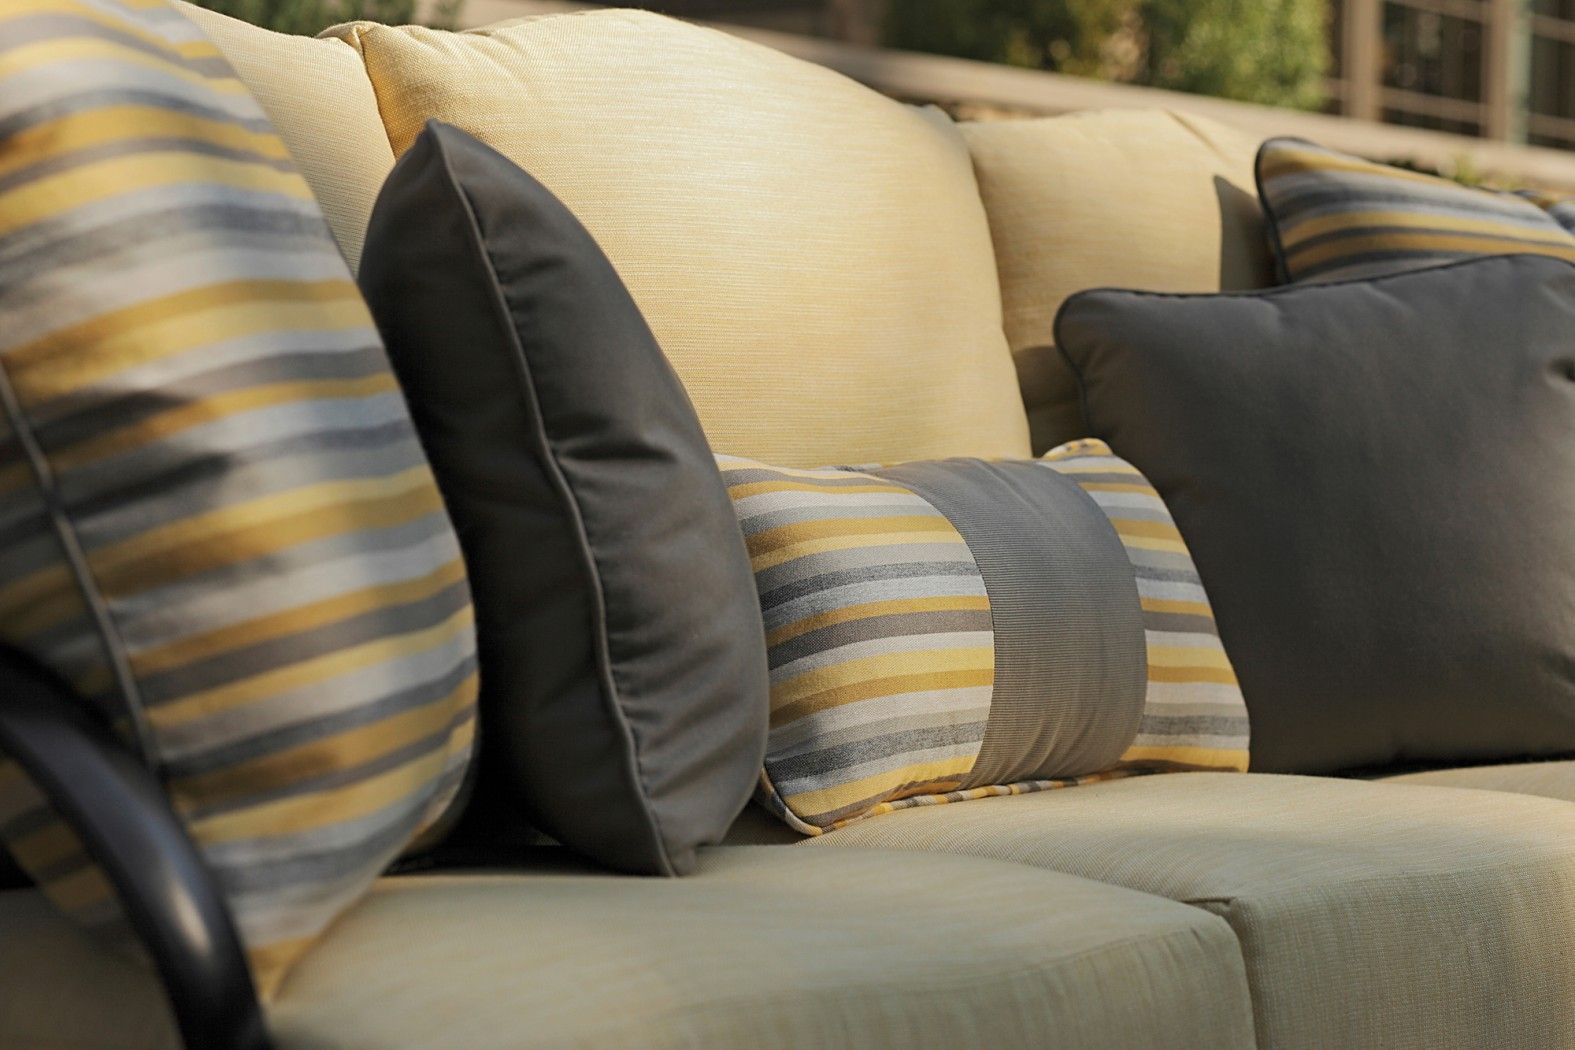 How to Remove Mildew from Outdoor Furniture